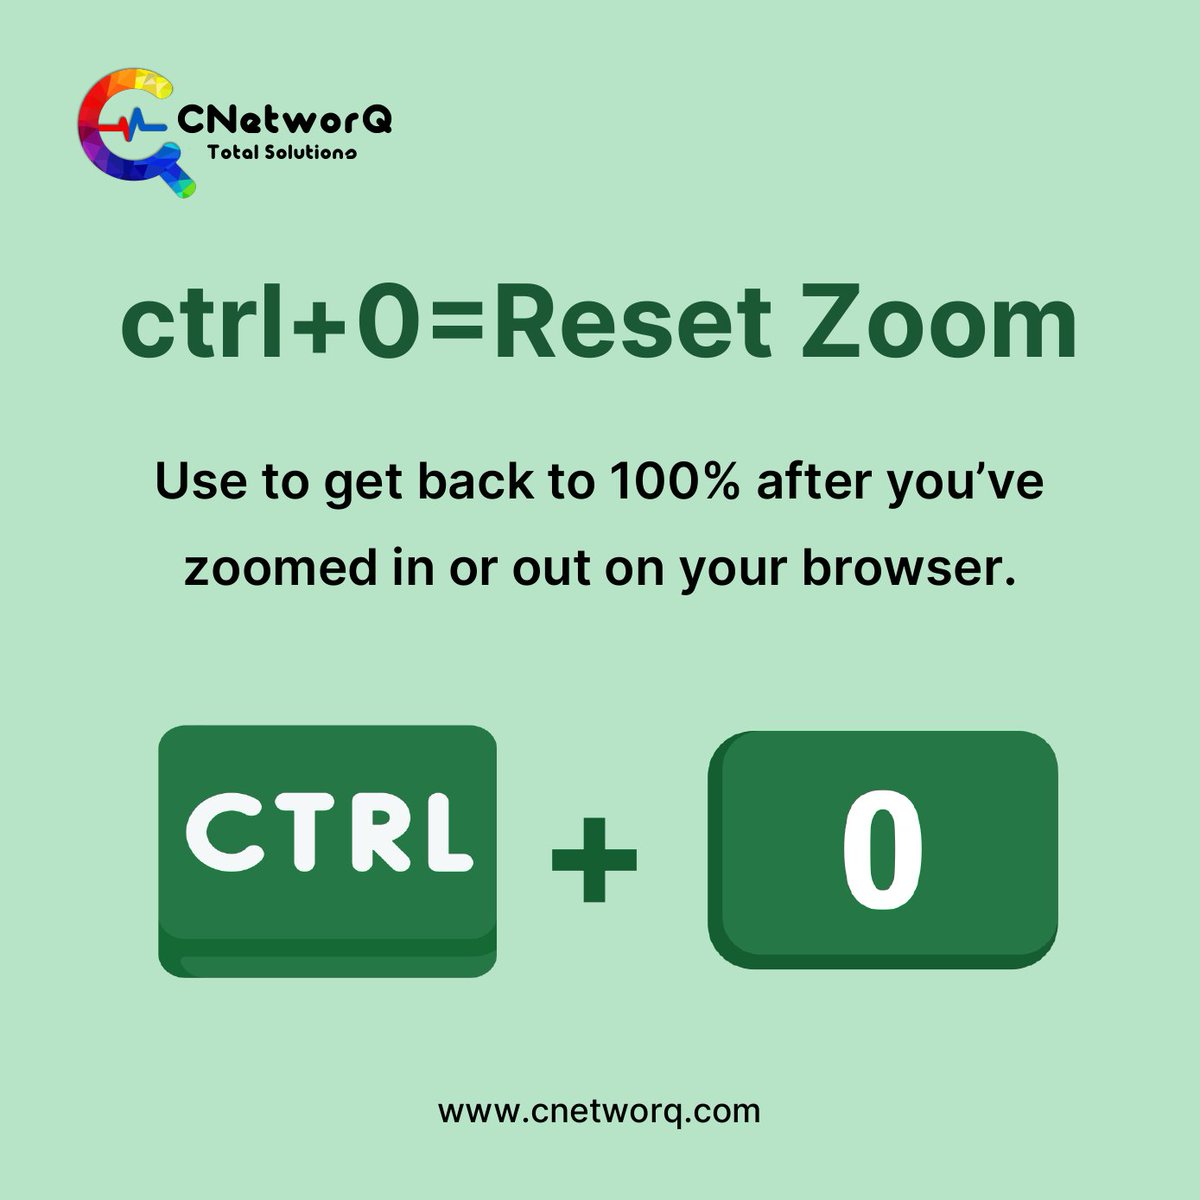 Smart Sunday Tip: Use Ctrl+0 to reset zoom and return to 100% on your browser after zooming in or out! 🖱️🔍

#CNetworQTotalSolutions #SmartSunday #BrowserTip #ZoomReset #KeyboardShortcuts #WebBrowsing #BrowserHacks #TechTips #Zooming #InternetTricks #DigitalWisdom #SundayFunday